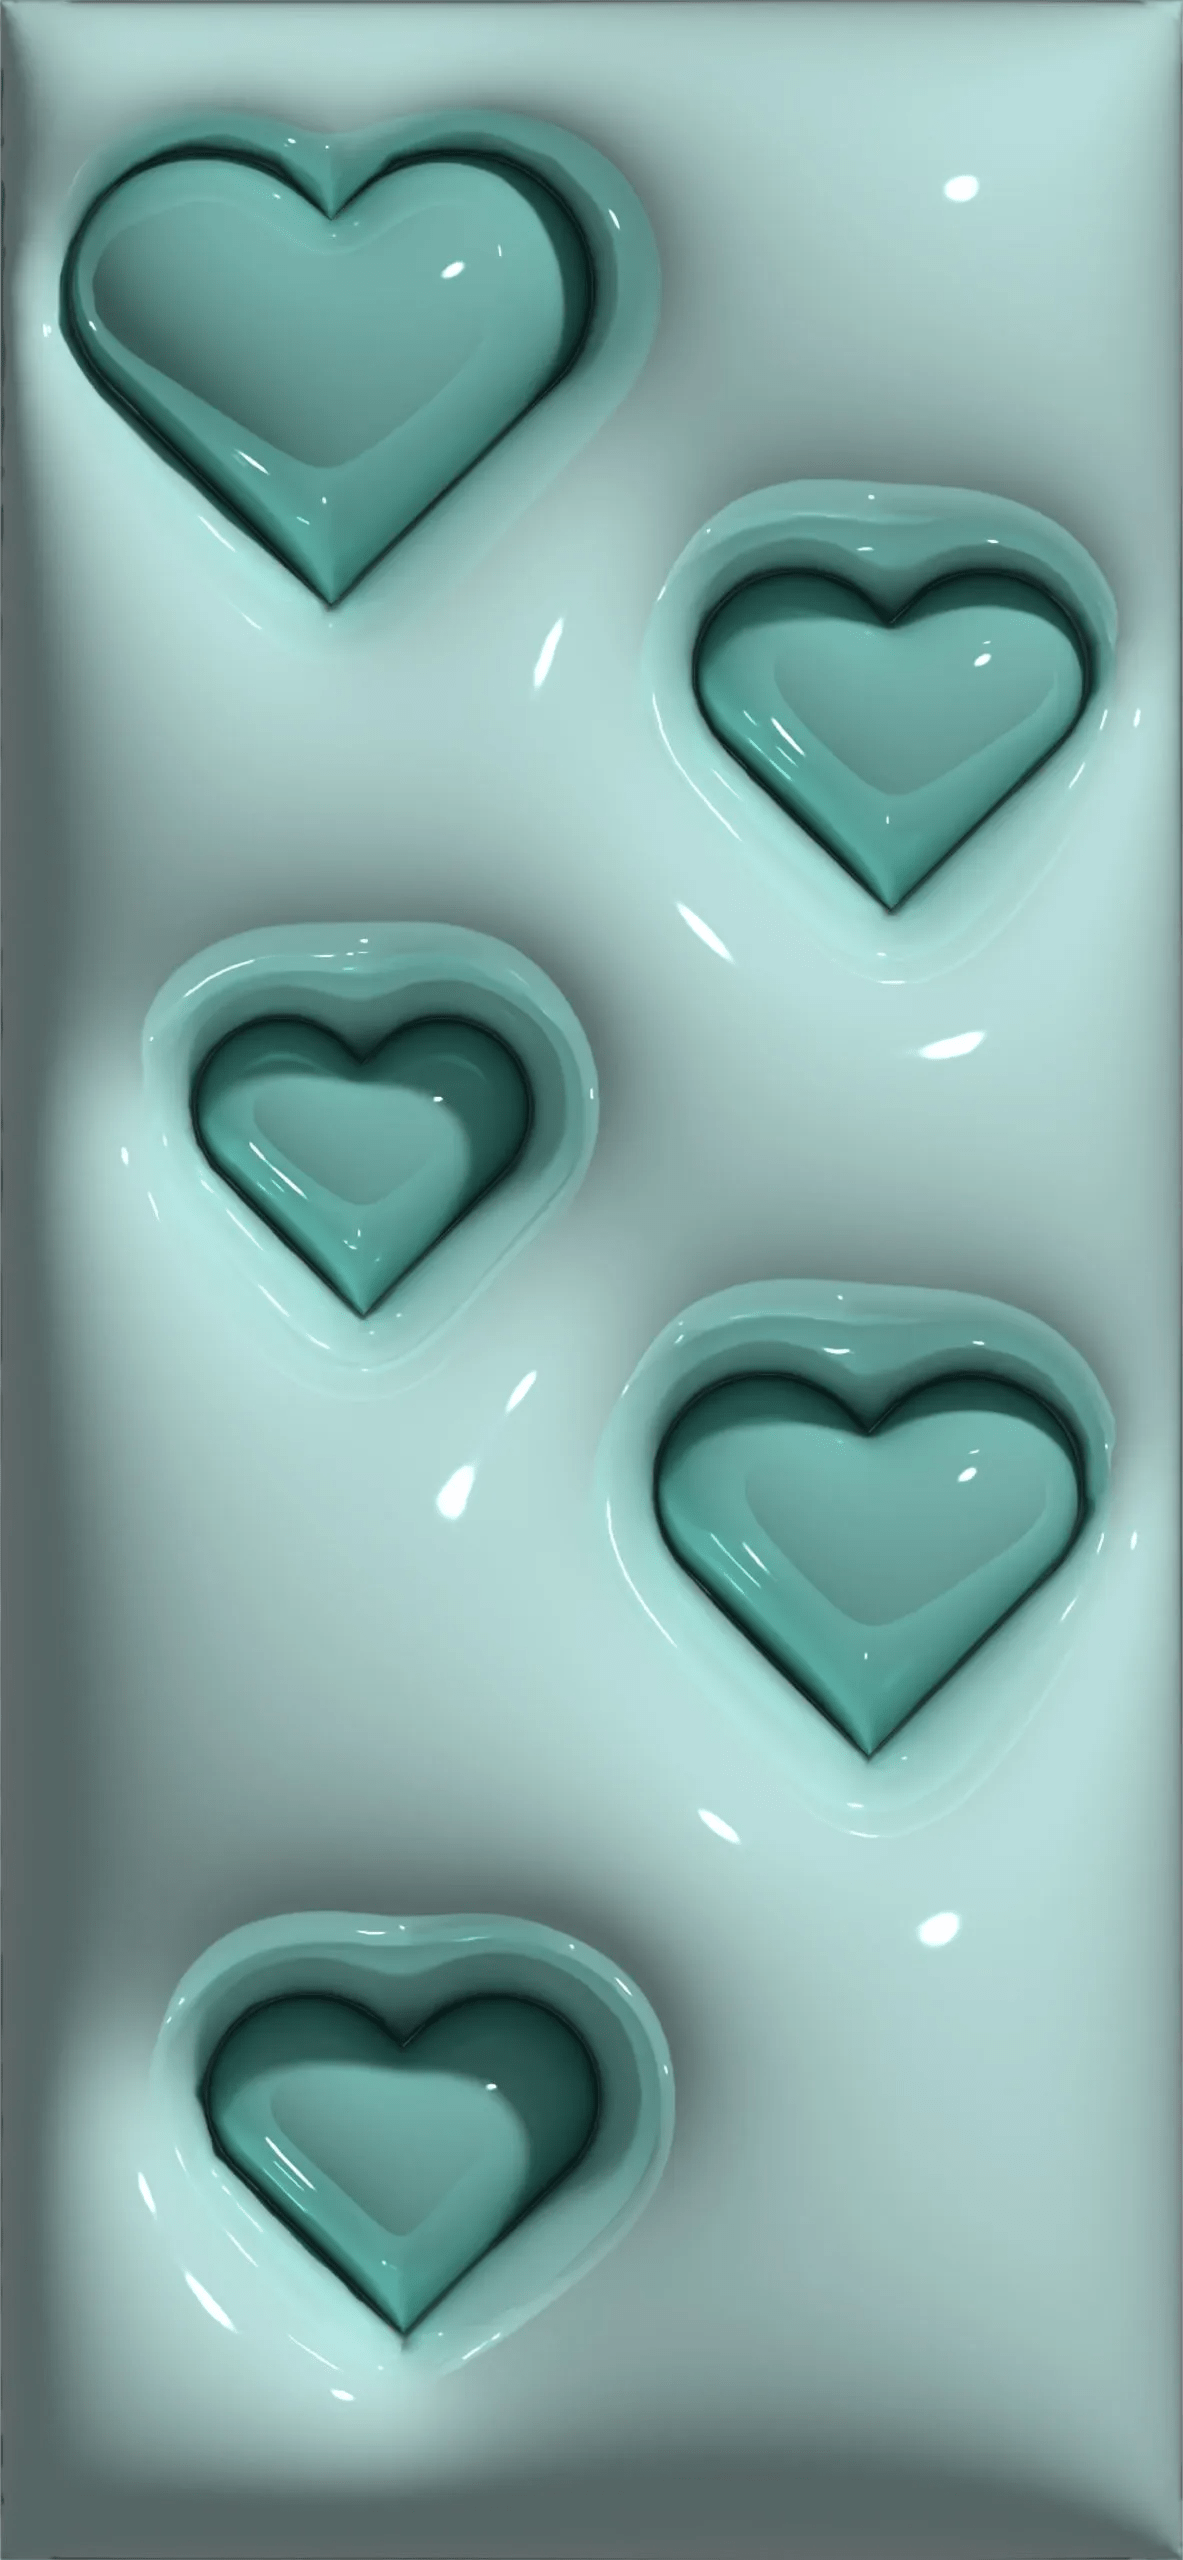 Really Cute 3D Aesthetic Wallpaper For Your Phone!. Teal wallpaper iphone, Bubbles wallpaper, 3D wallpaper iphone